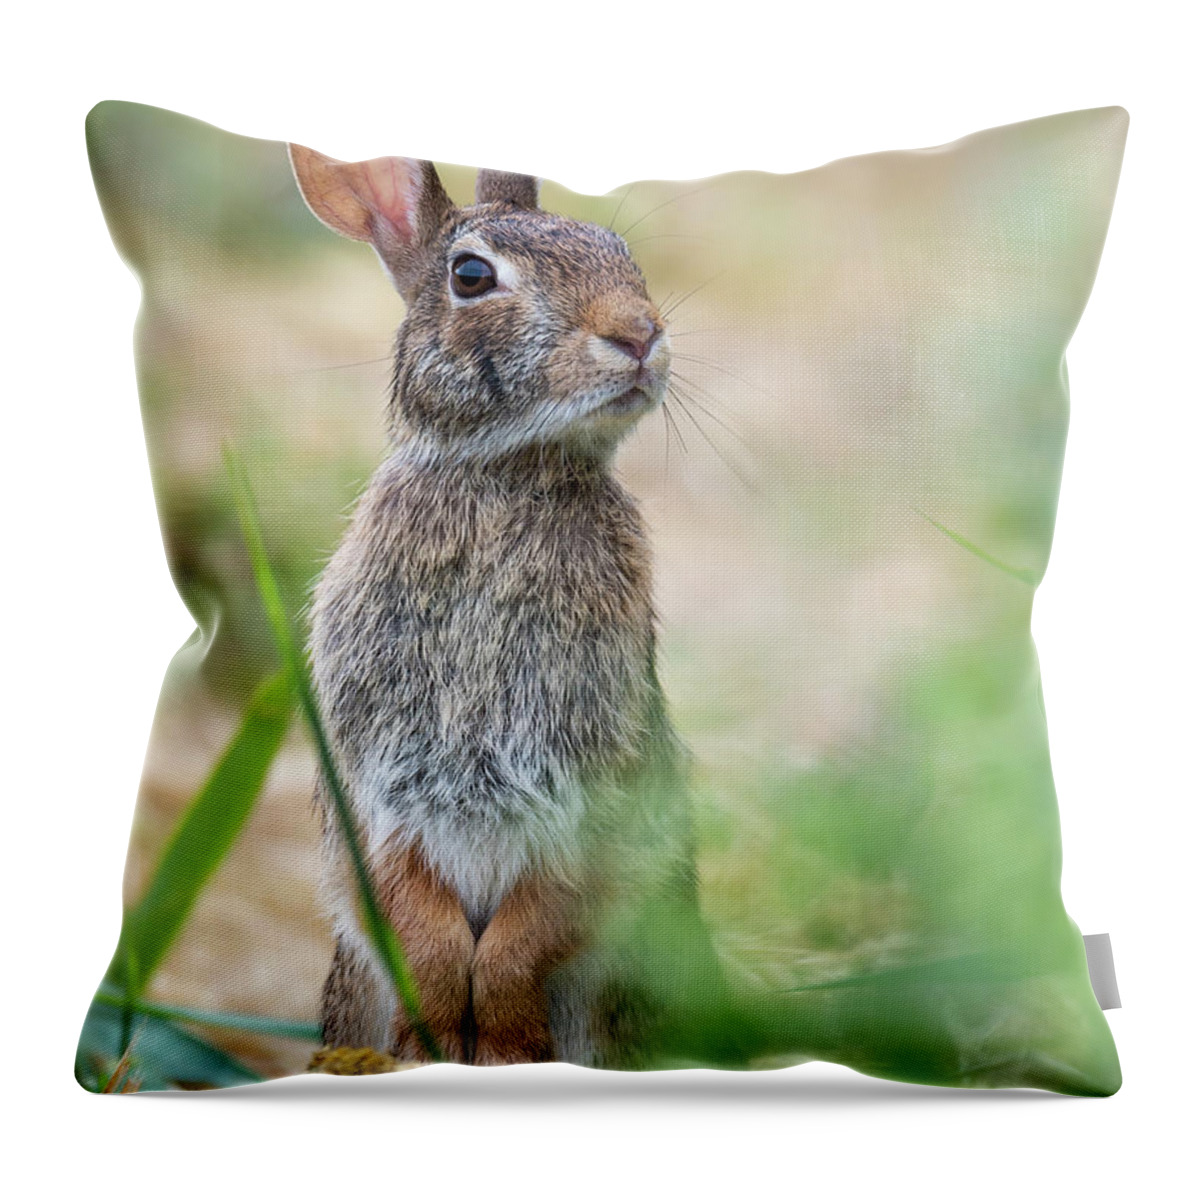 Rabbit Throw Pillow featuring the photograph What's up doc? by Ian Sempowski